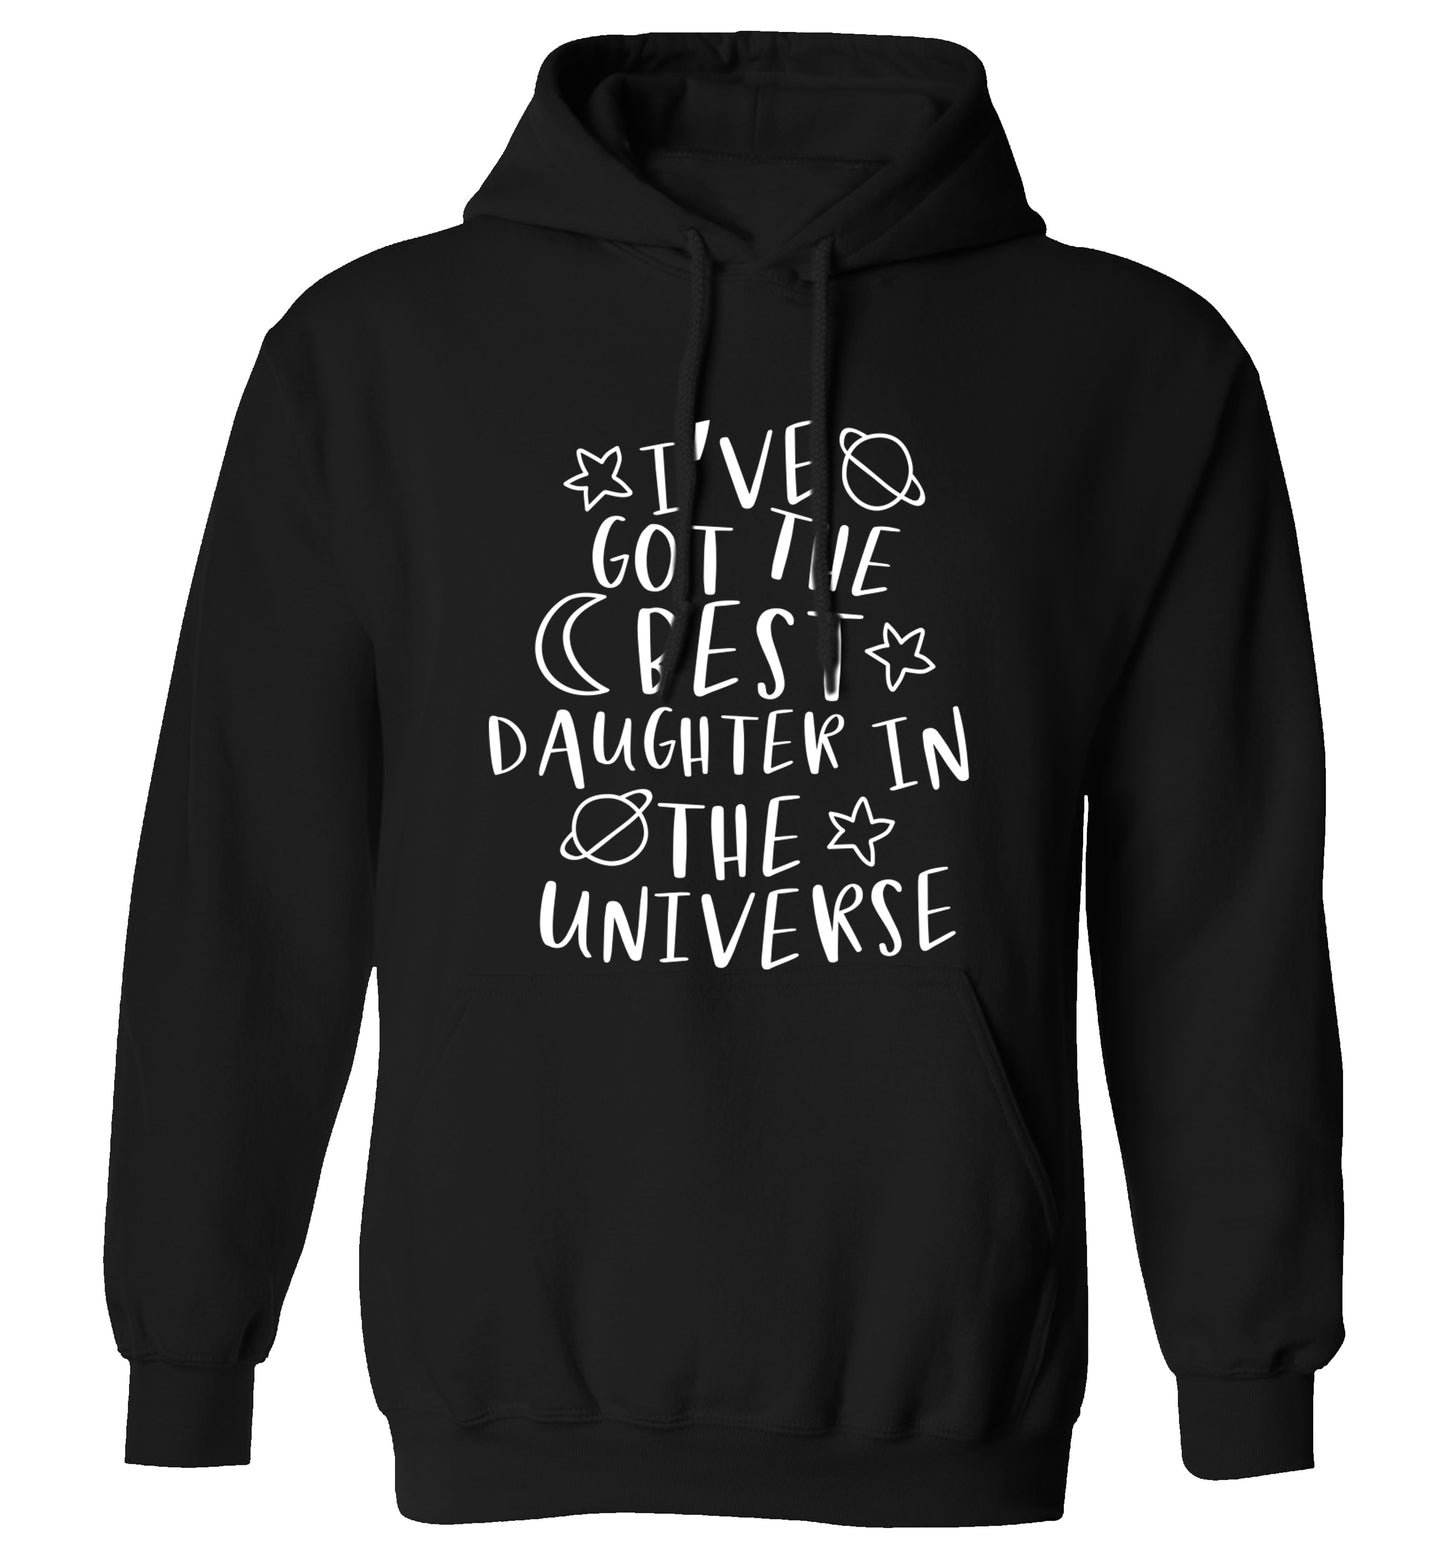 I've got the best daughter in the universe adults unisex black hoodie 2XL